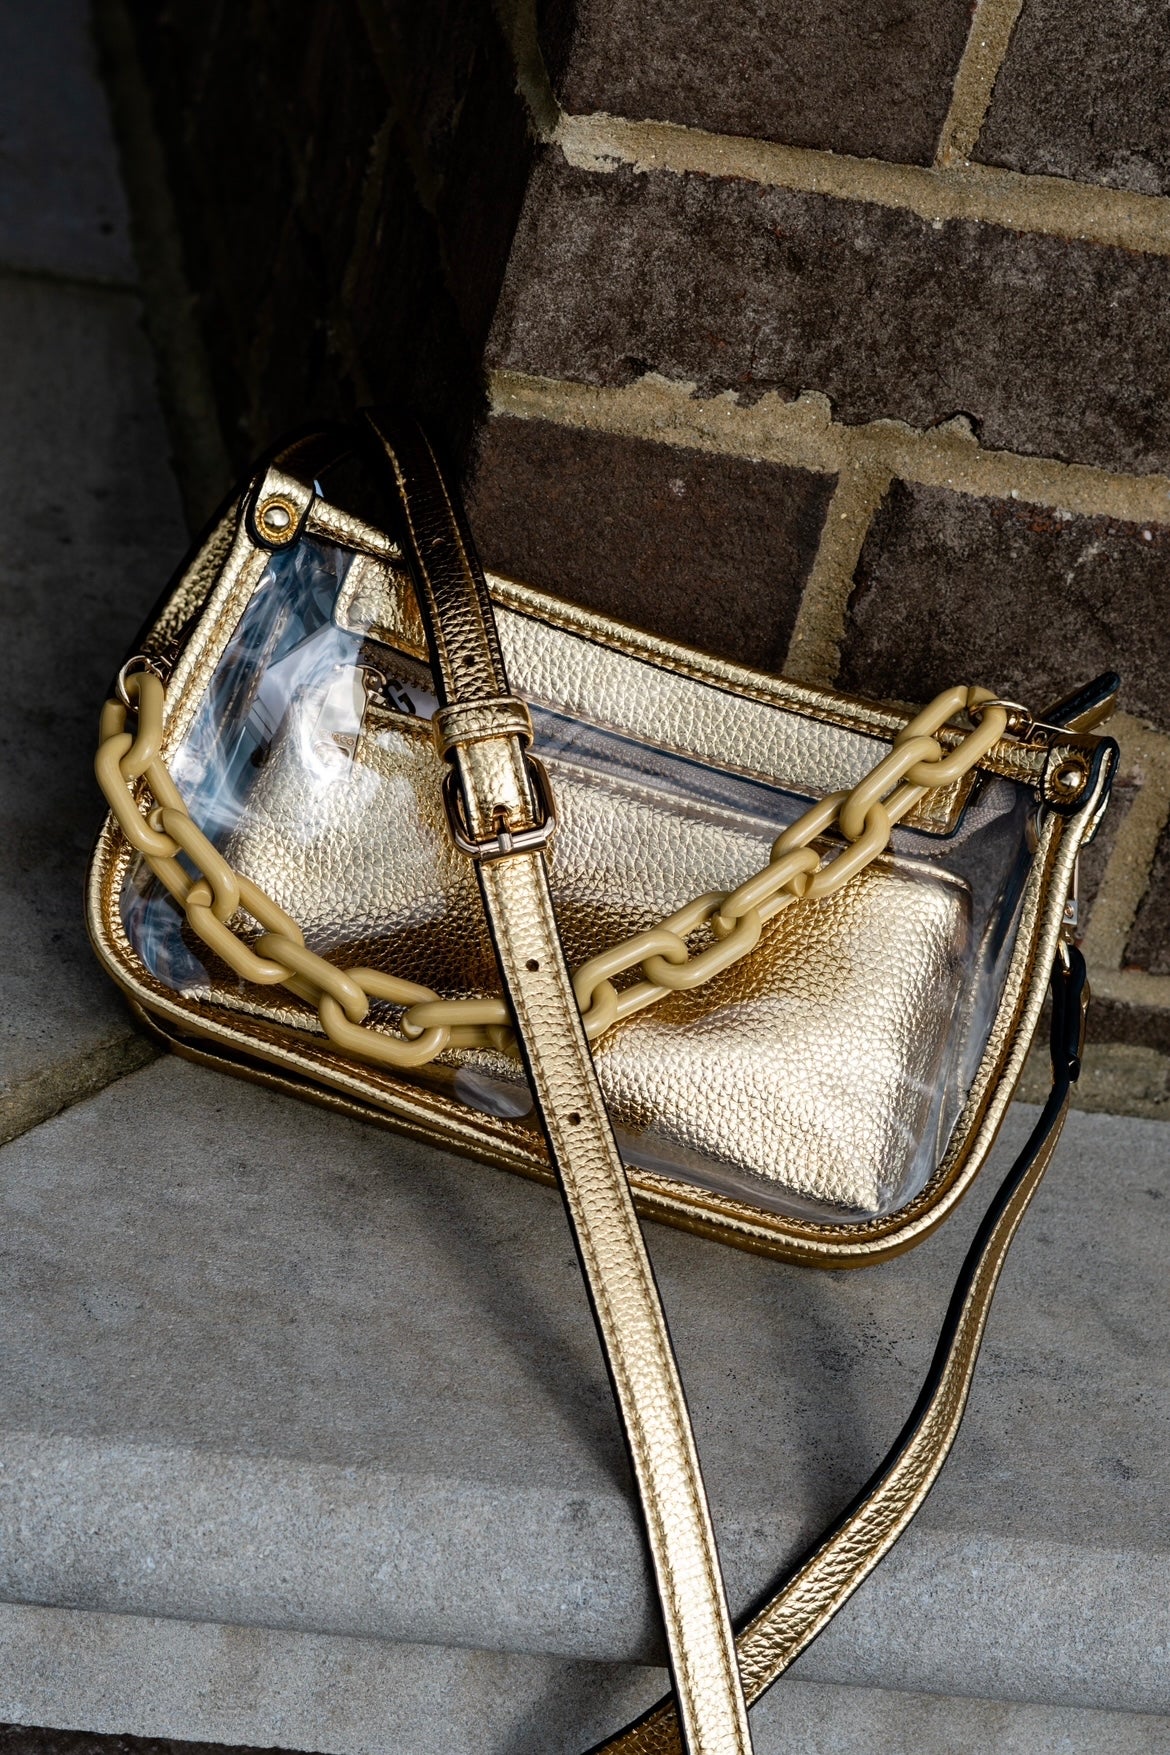 Jessica Clear Stadium Purse Colored Trim Colored Removable Strap Colored Plastic Chain Small Removable Zipper Insert to Match Approx. 8 1/2 in X 5 in gold color